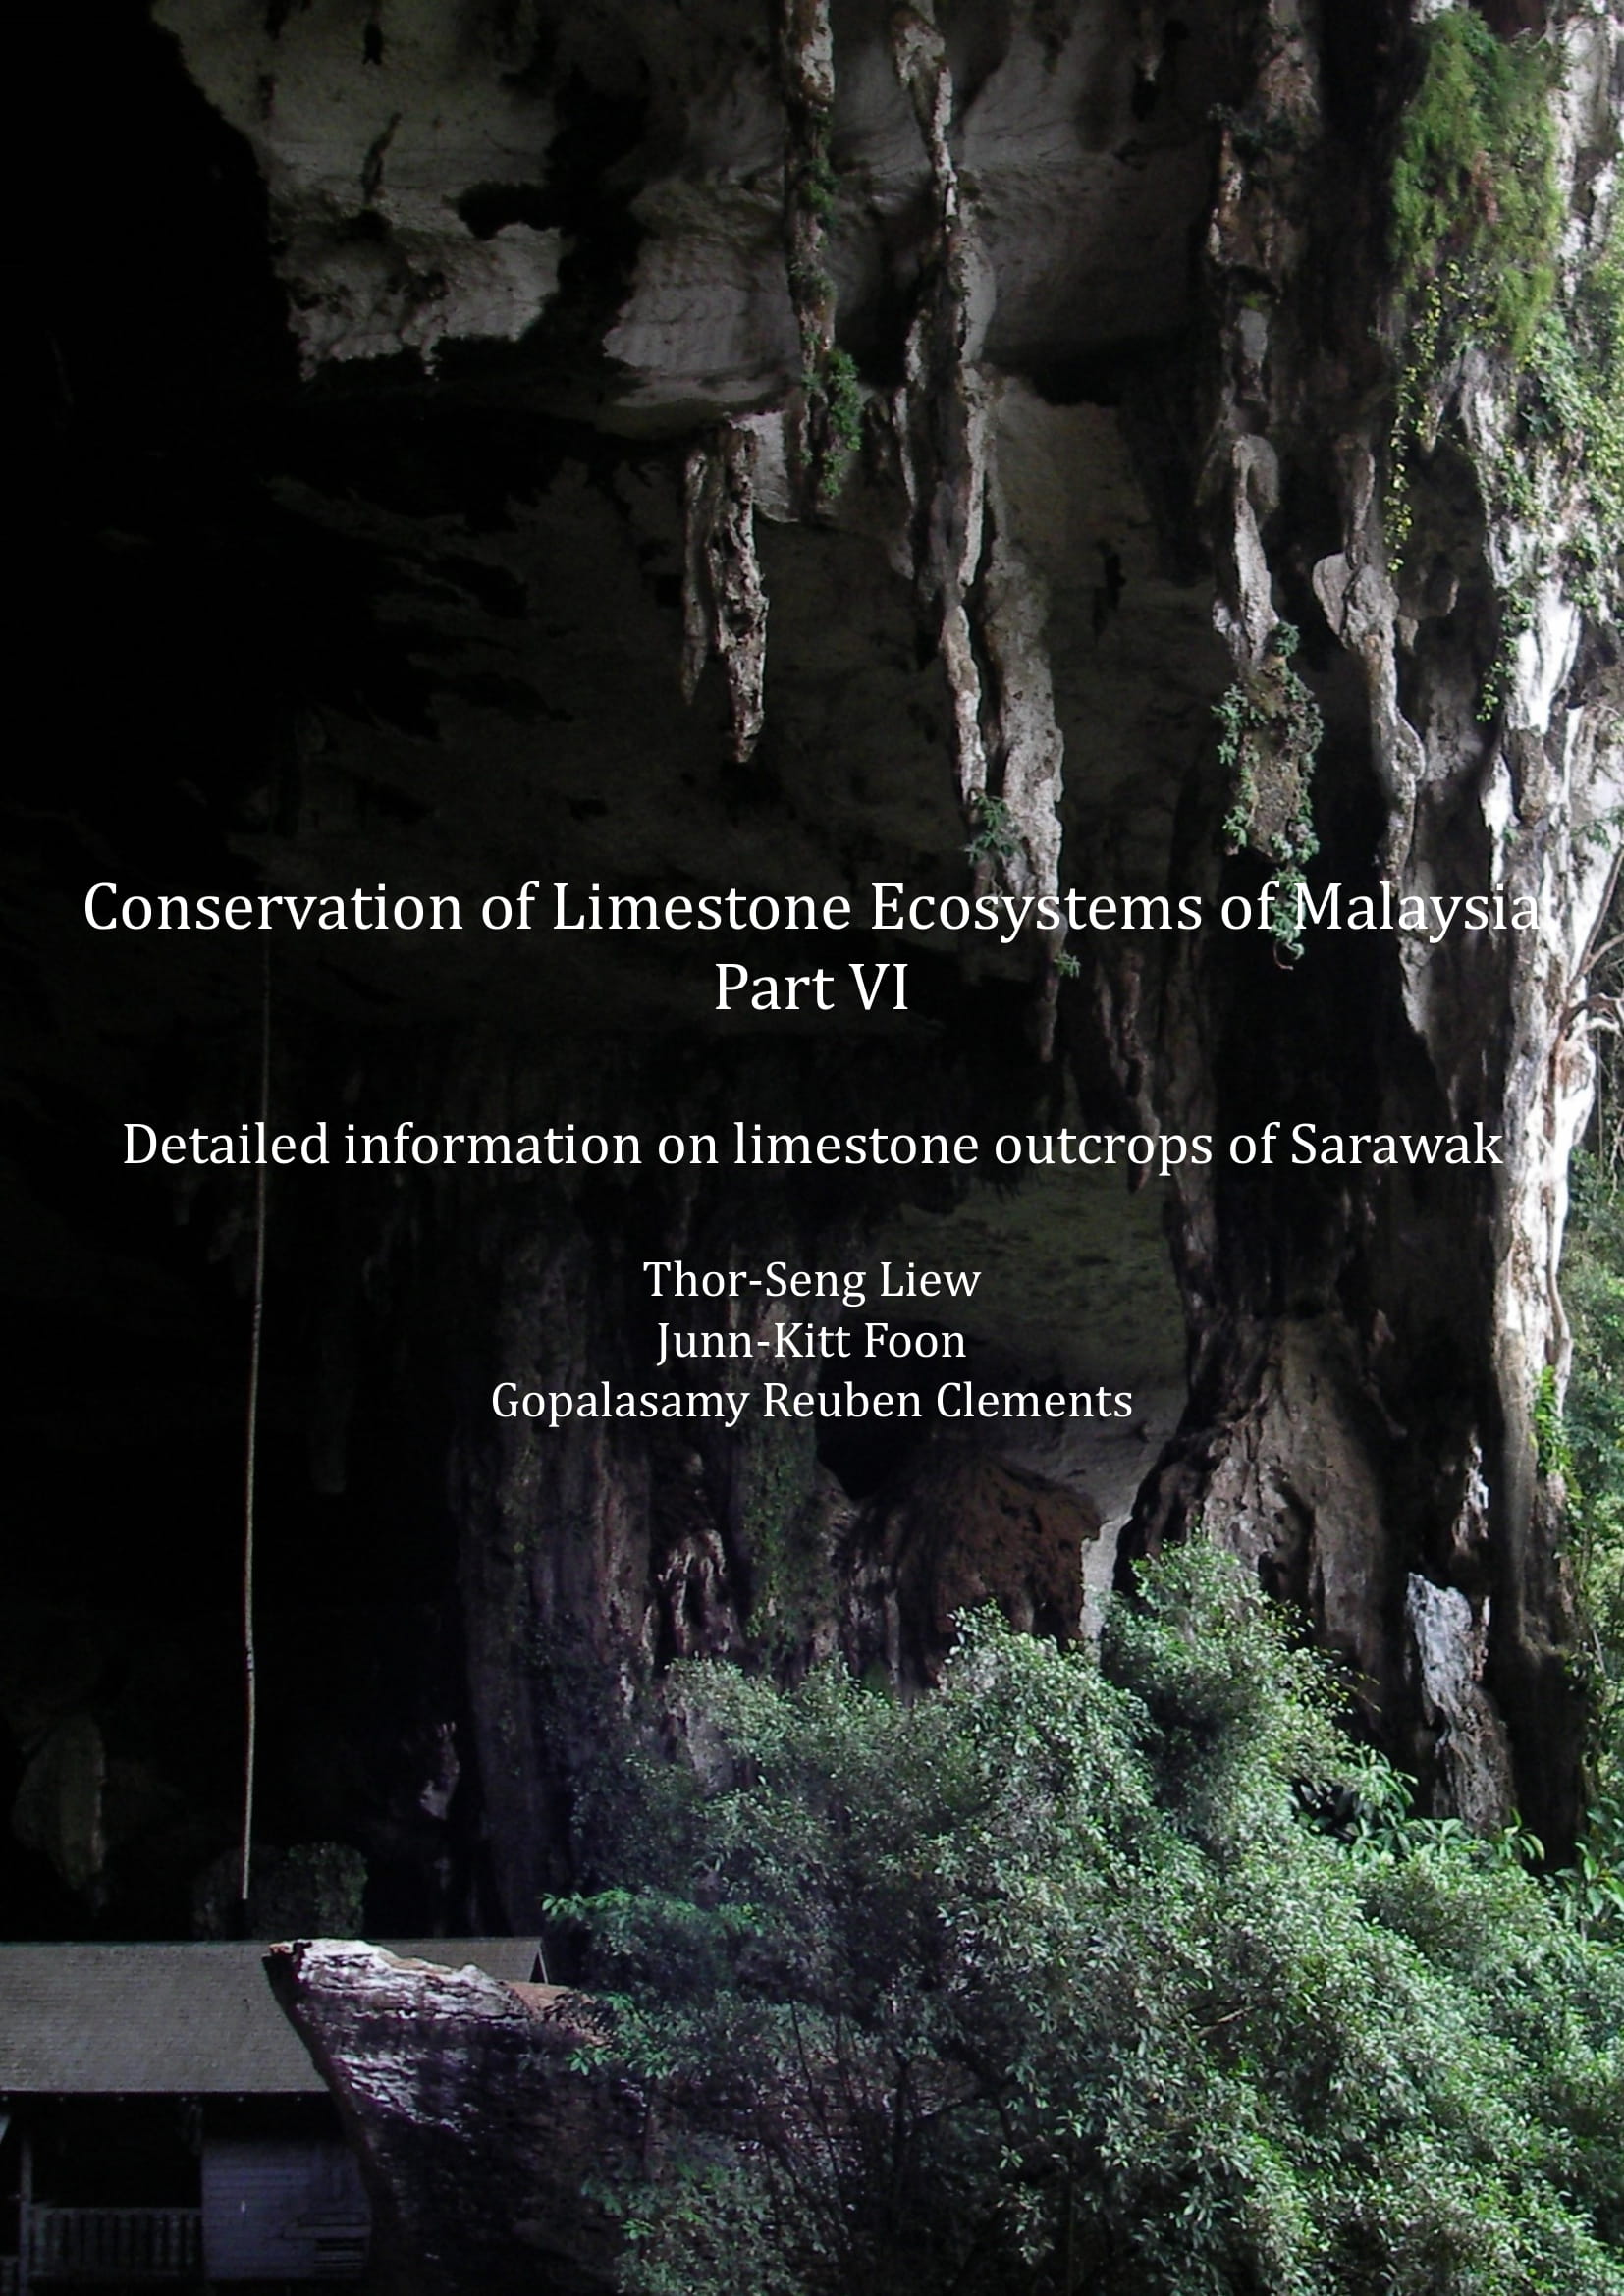 Conservation of Limestone Ecosystem of Malaysia, Part VI, Detailed information on limestone outcrops of Sarawak.